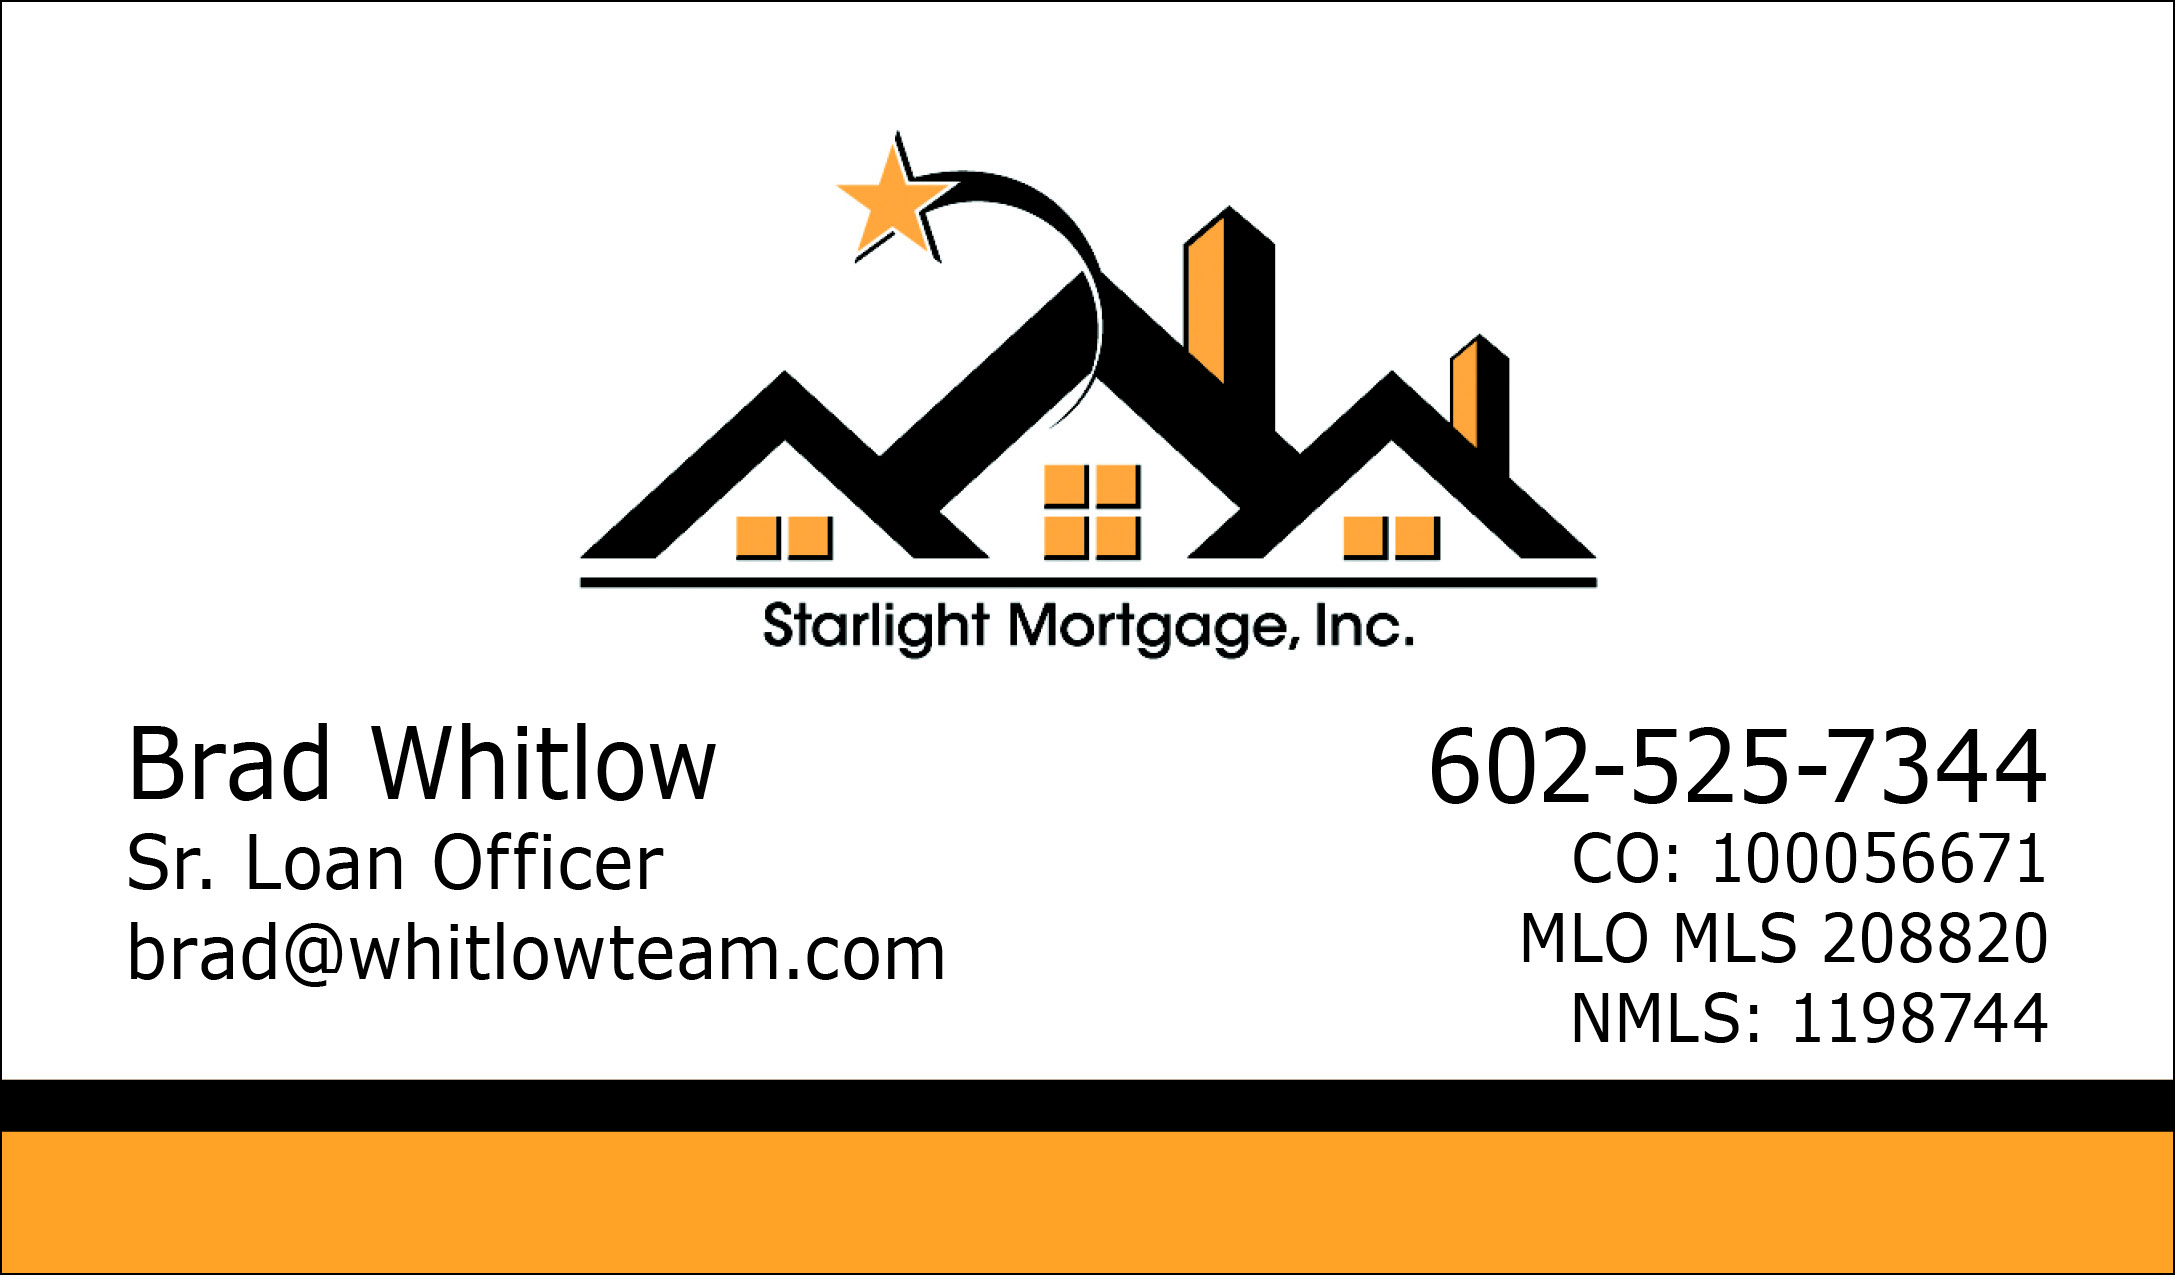 Starlight Mortgage, Inc. business card, one-sided, four-color